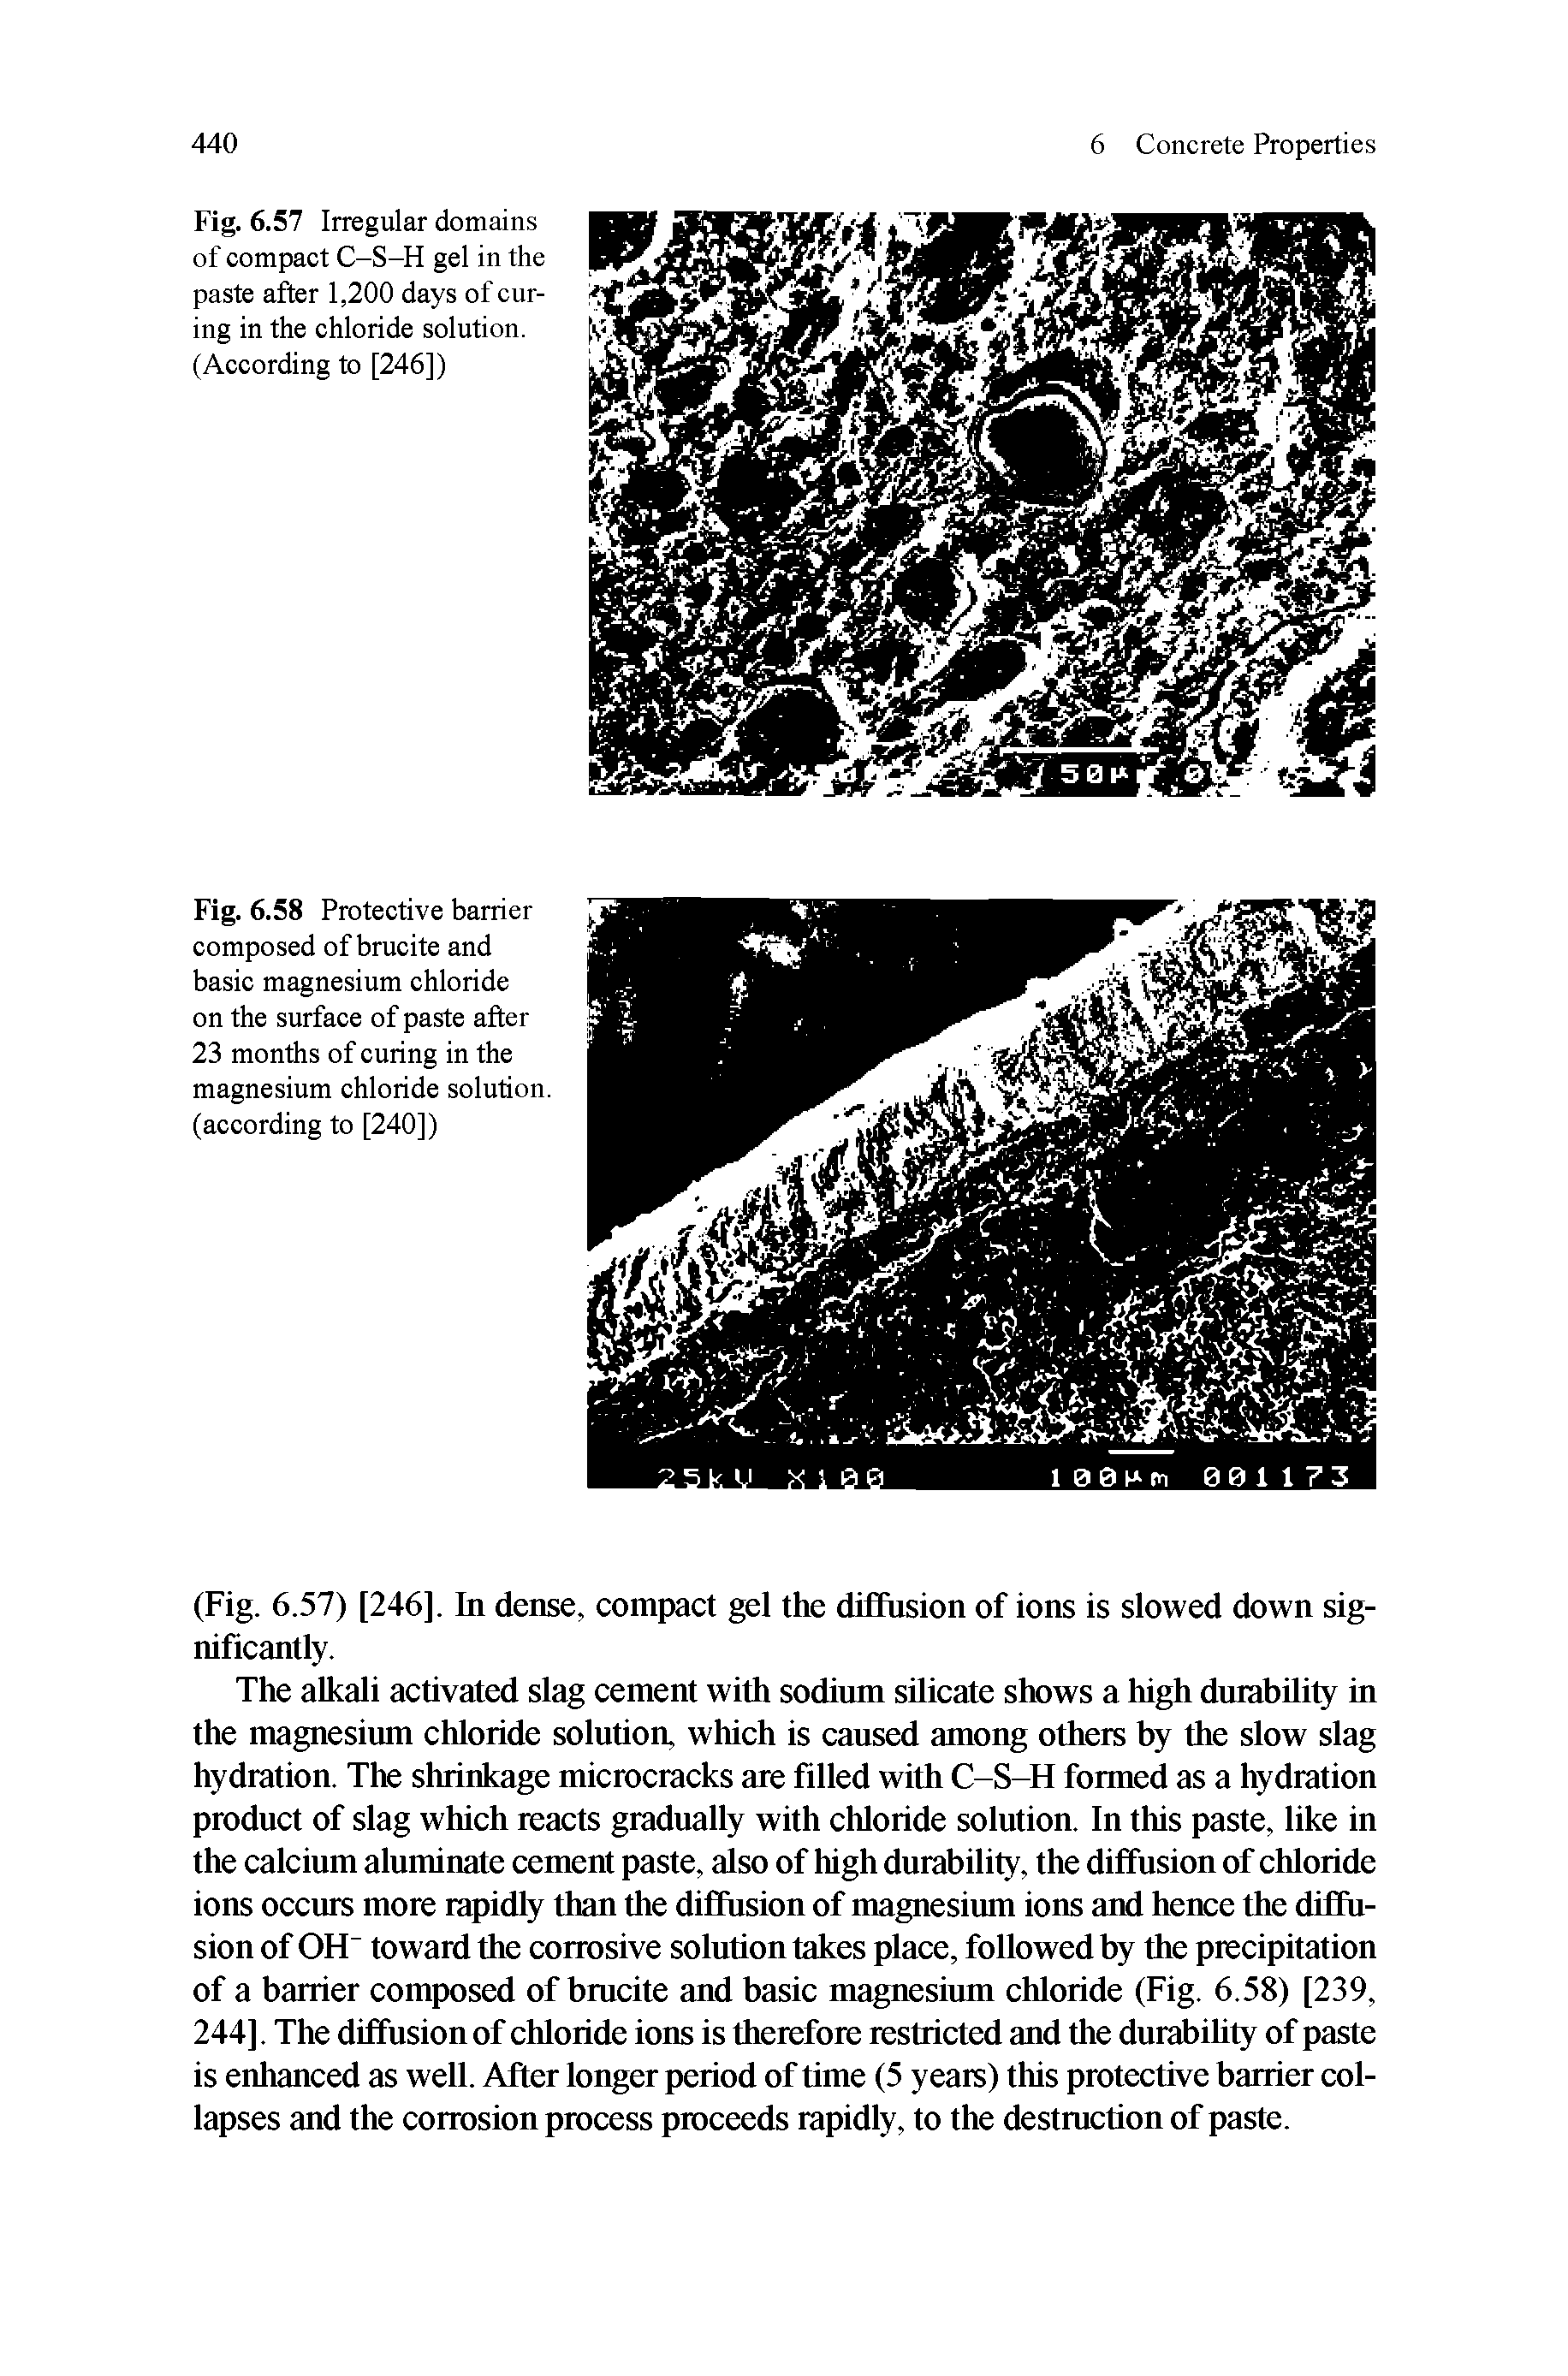 Fig. 6.58 Protective barrier composed of brucite and basic magnesium chloride on the surface of paste after 23 months of curing in the magnesium chloride solution, (according to [240])...